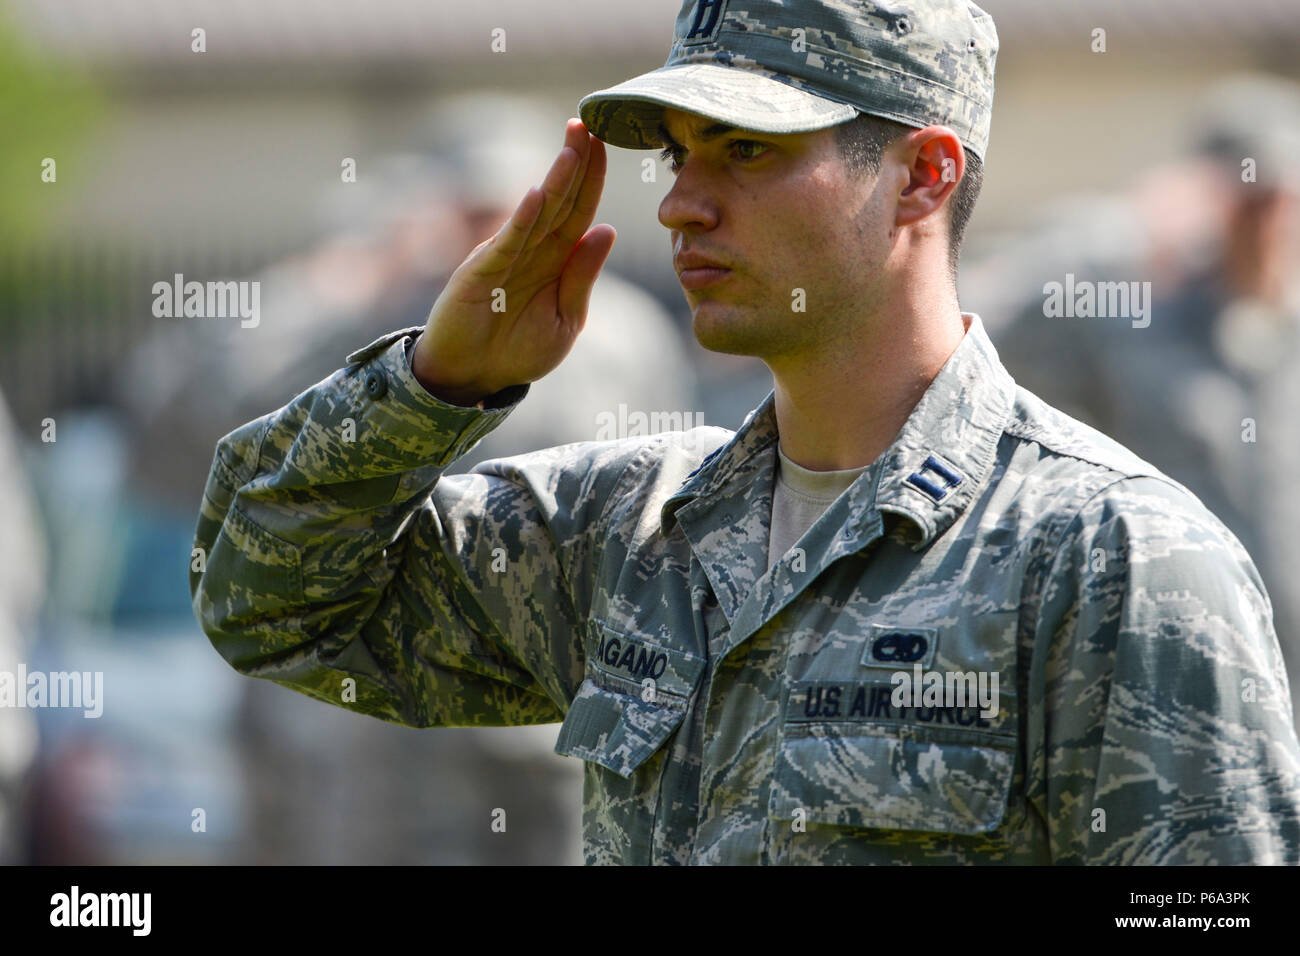 Capt. Alexander Pagano, a 89th Maintenance Group maintenance officer and 89th Airlift Wing executive officer, salutes as the National Anthem was sung and the American flag was lowered during a Memorial Day retreat ceremony at the 89th AW headquarters building at Joint Base Andrews, Md., May 26, 2016. Memorial Day is an American federal holiday to remember those who died while serving in the U.S. armed forces. (U.S. Air Force photo by Senior Master Sgt. Kevin Wallace/RELEASED) Stock Photo